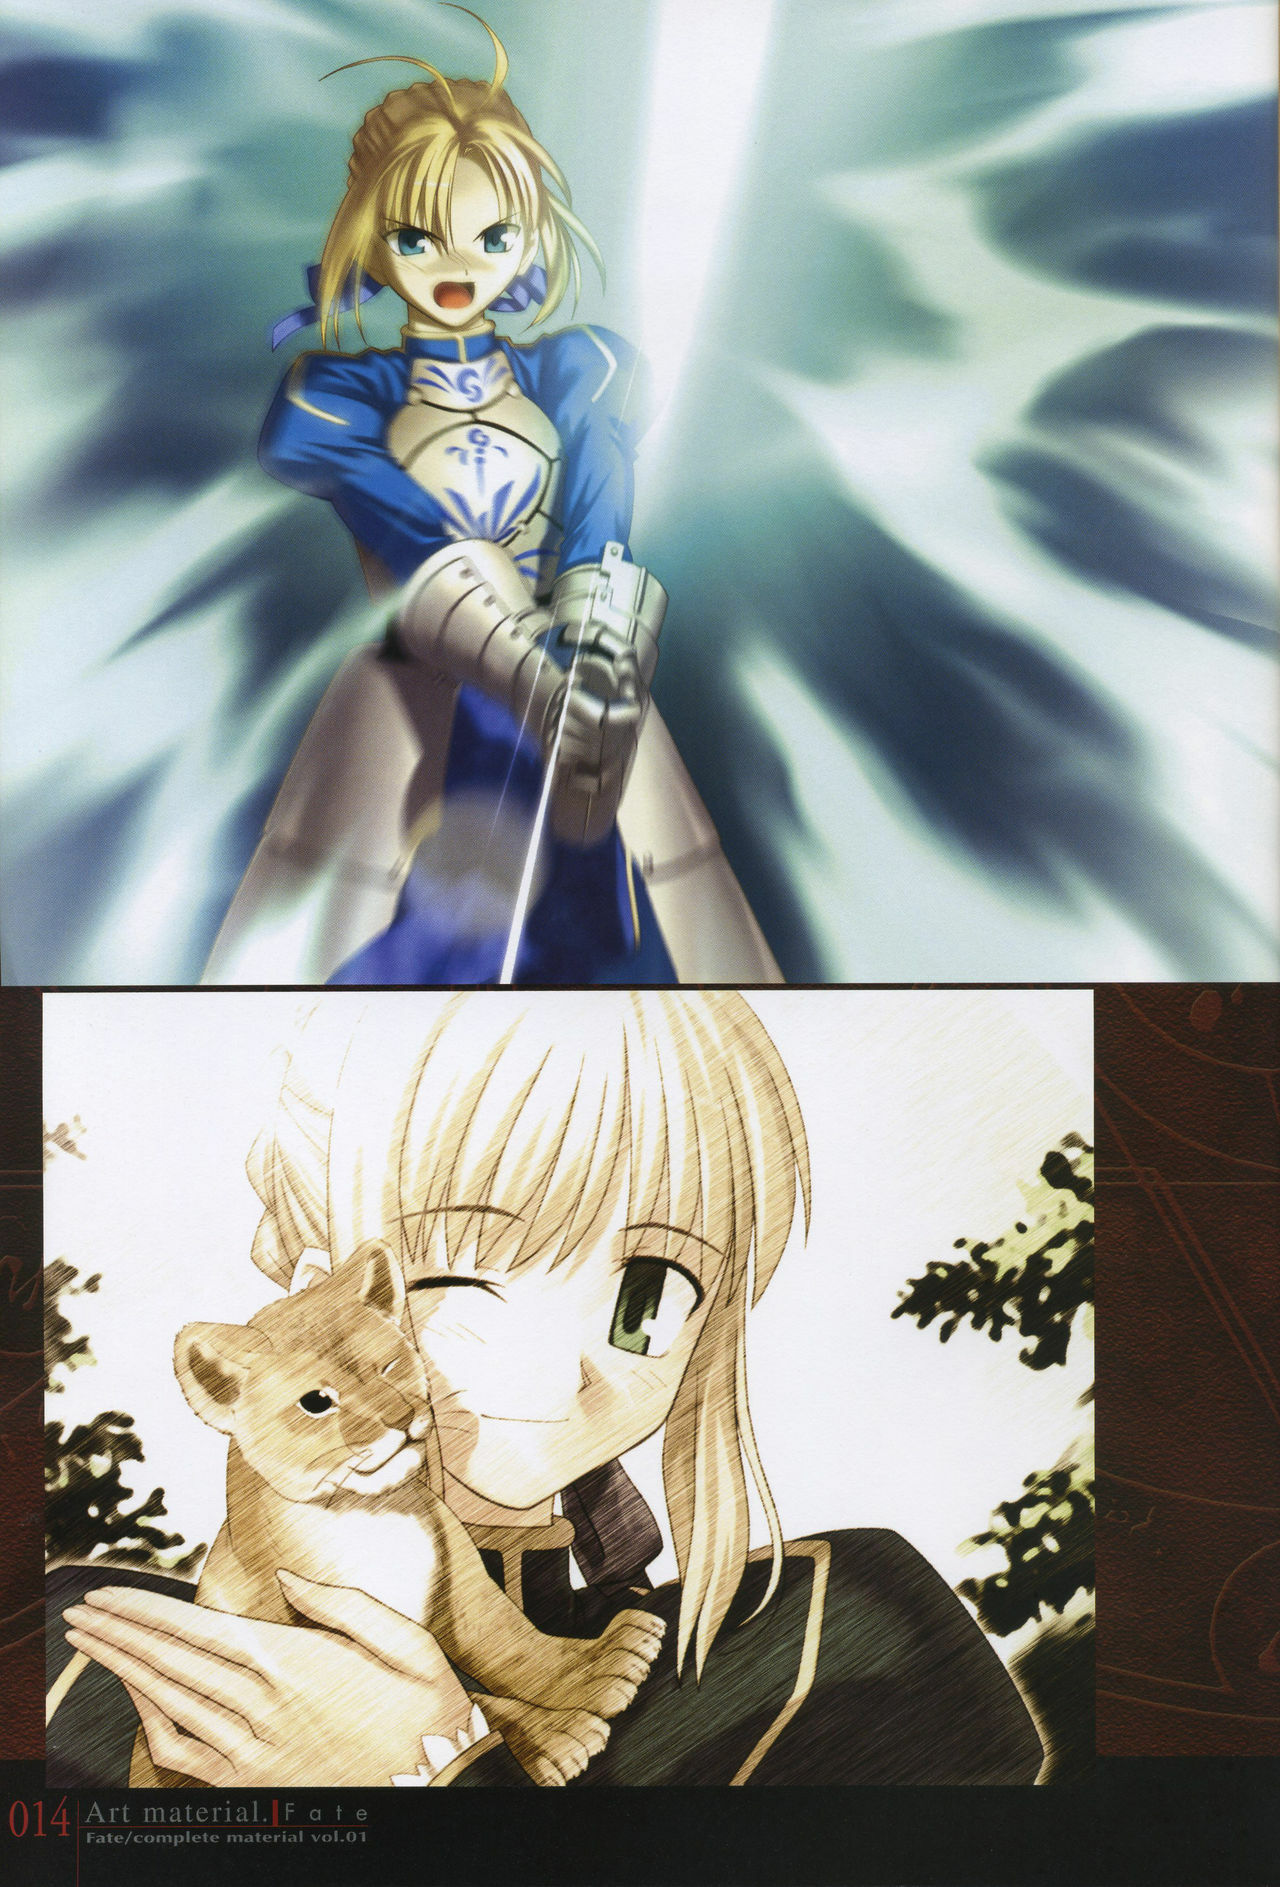 [Type-Moon] Fate/complete material I - Art material. page 19 full